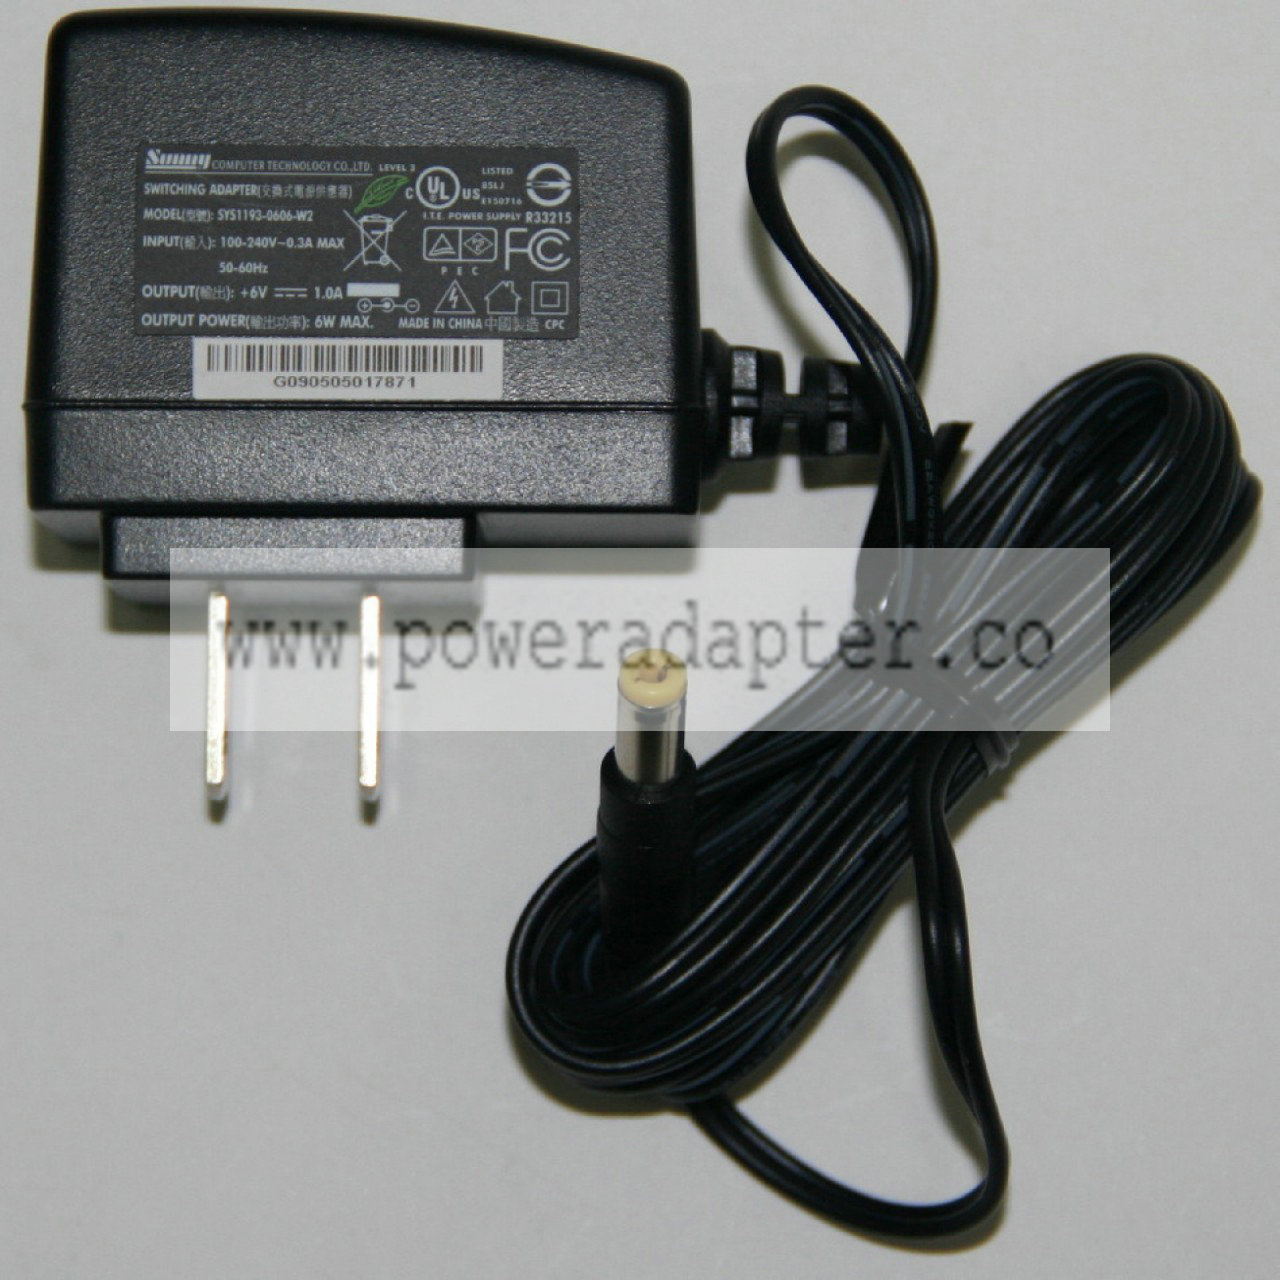 Akai MP6-1 AC Adapter for MPD24 and MPK49 (optional) Product Description Akai MP6-I AC Adapter for MPD24 and MPK49 (op